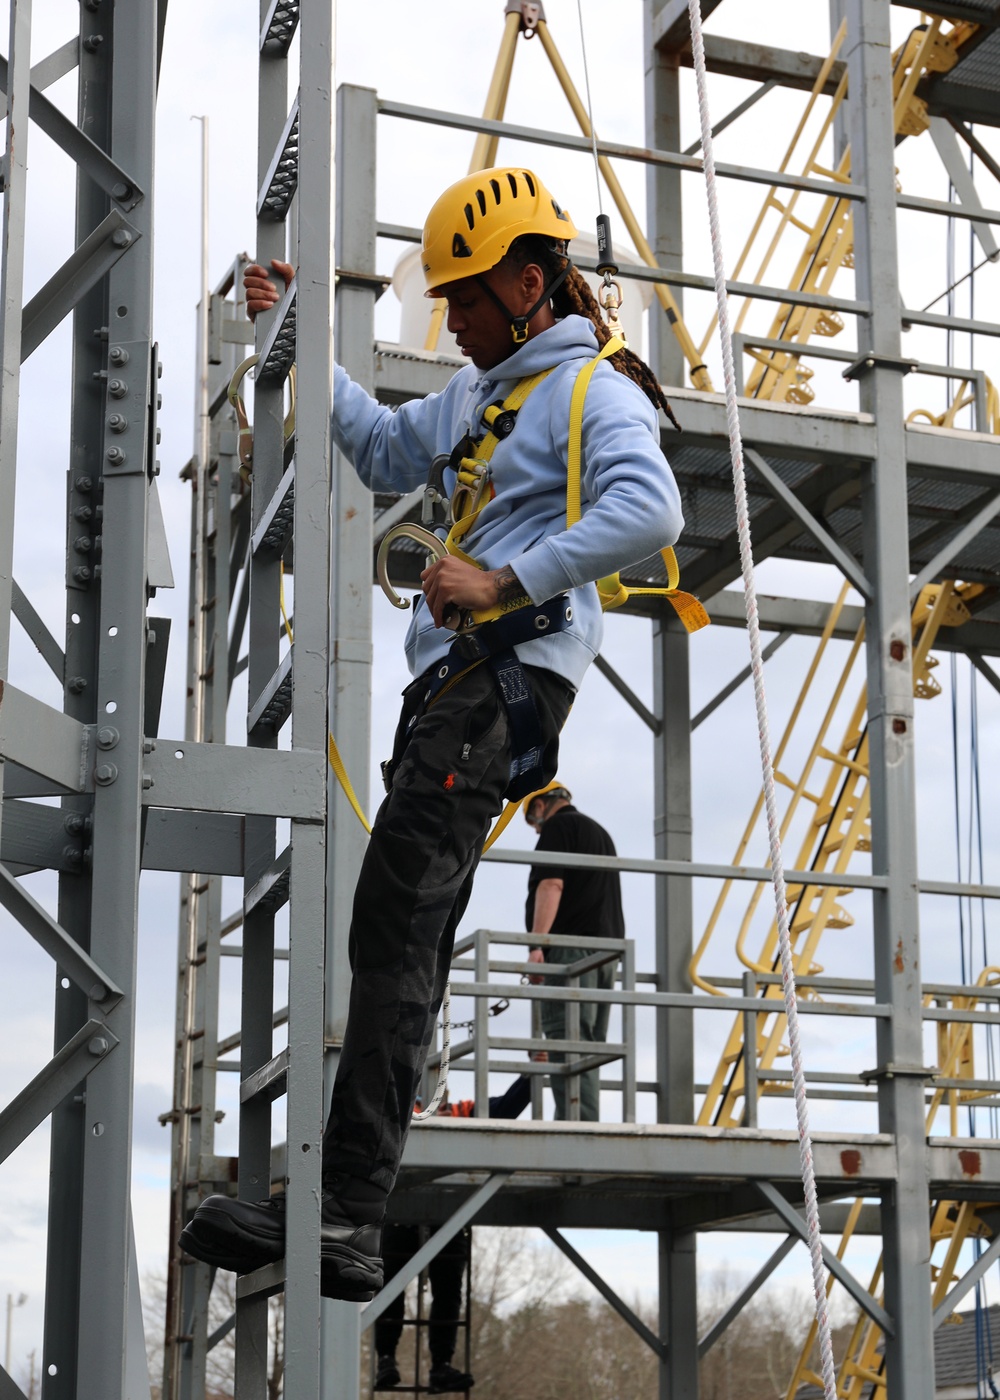 Military Sealift Command Training Center East: Fall Protection